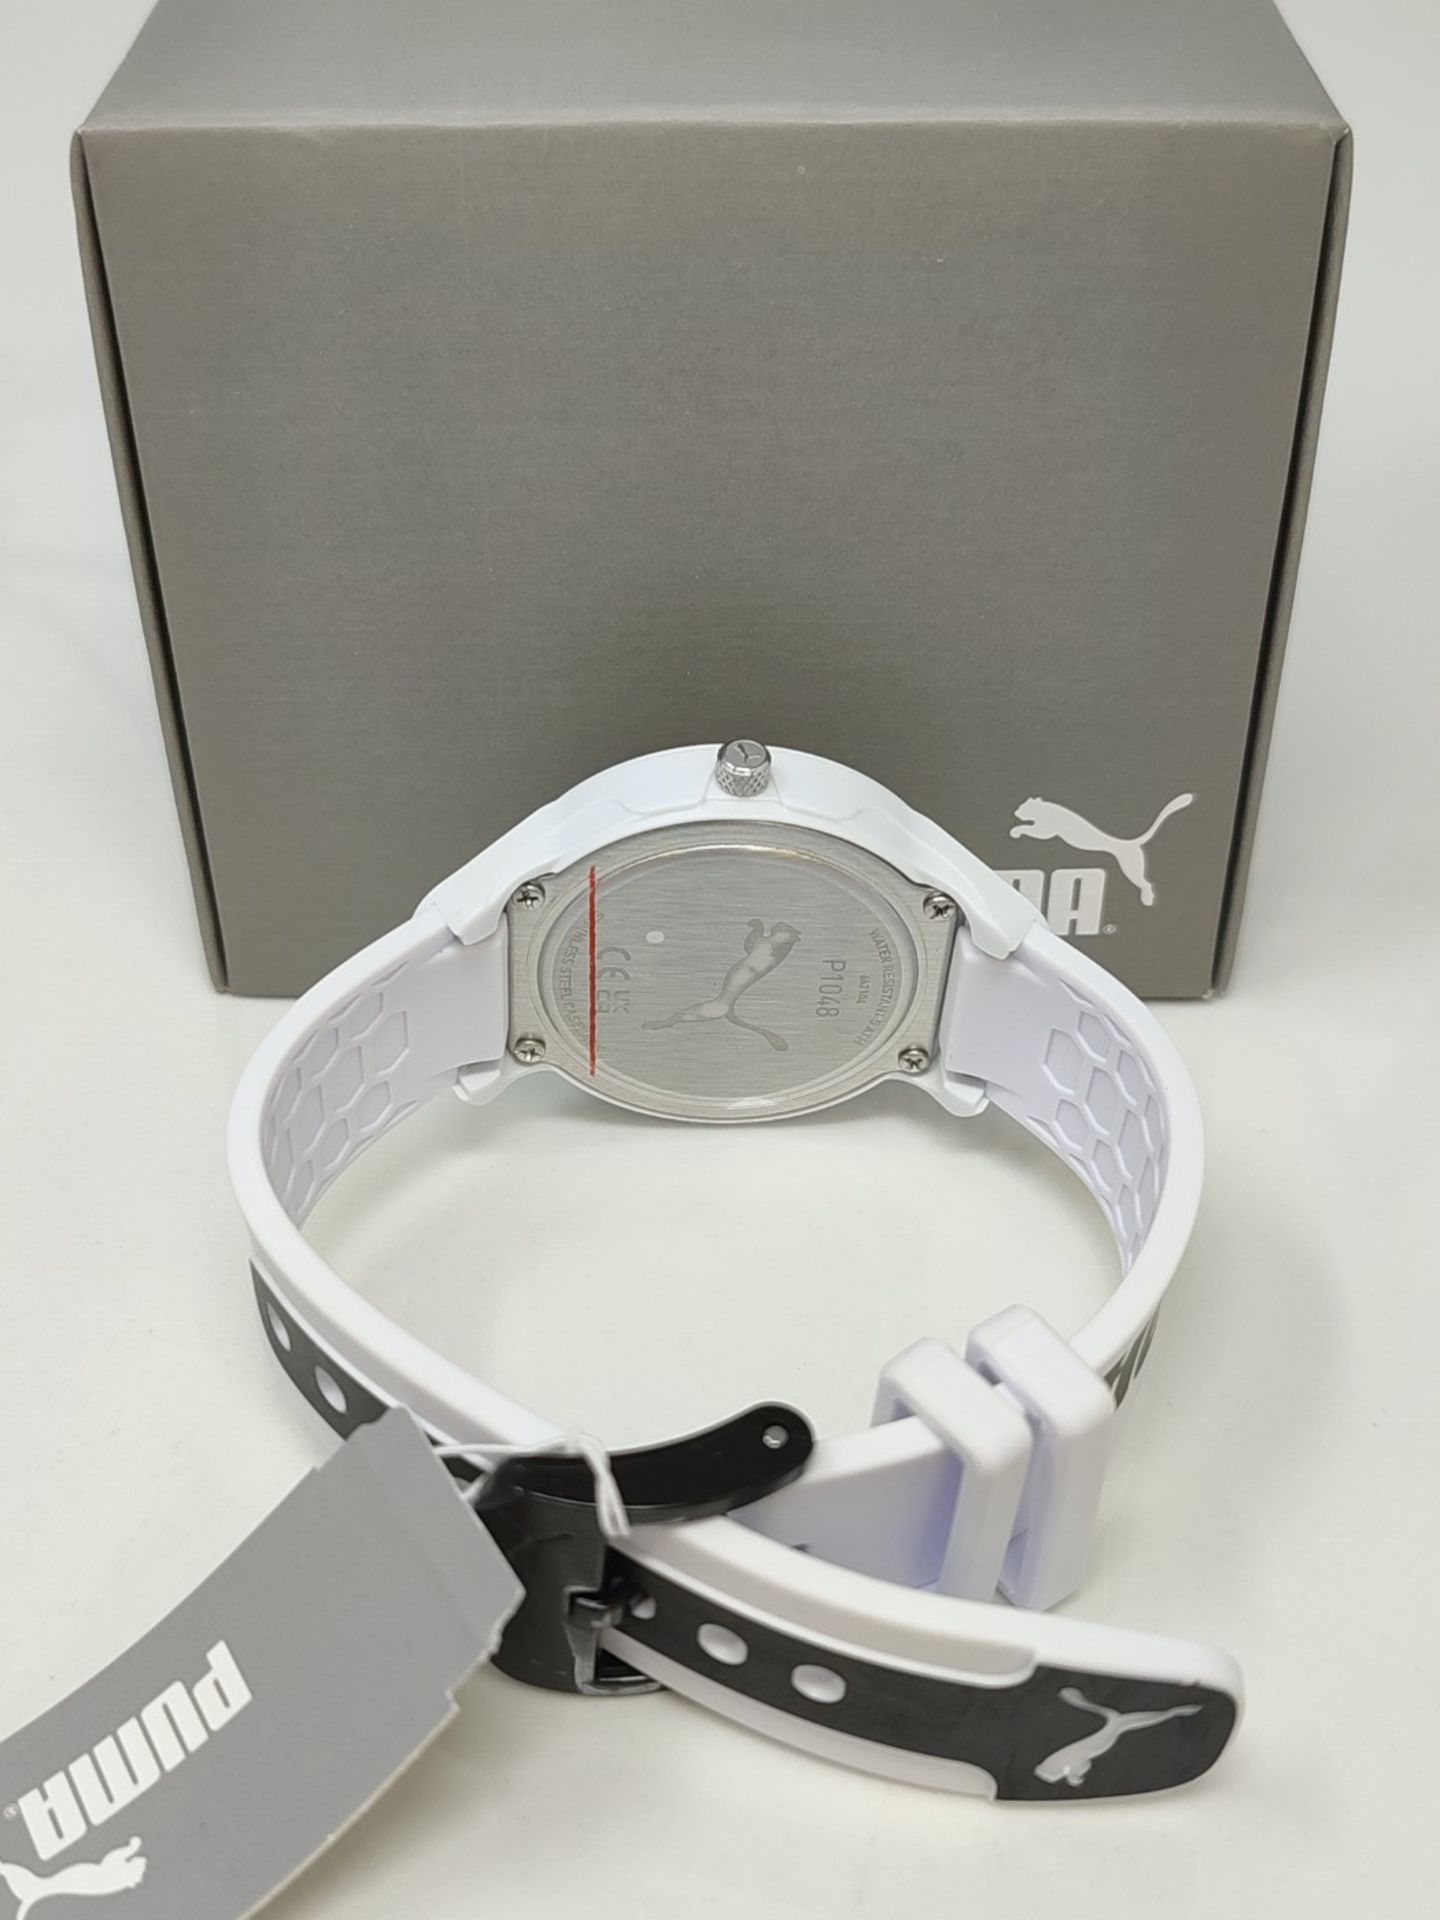 Puma women's watch Reset V2, three-hand movement, 36mm white polycarbonate case with p - Image 3 of 3